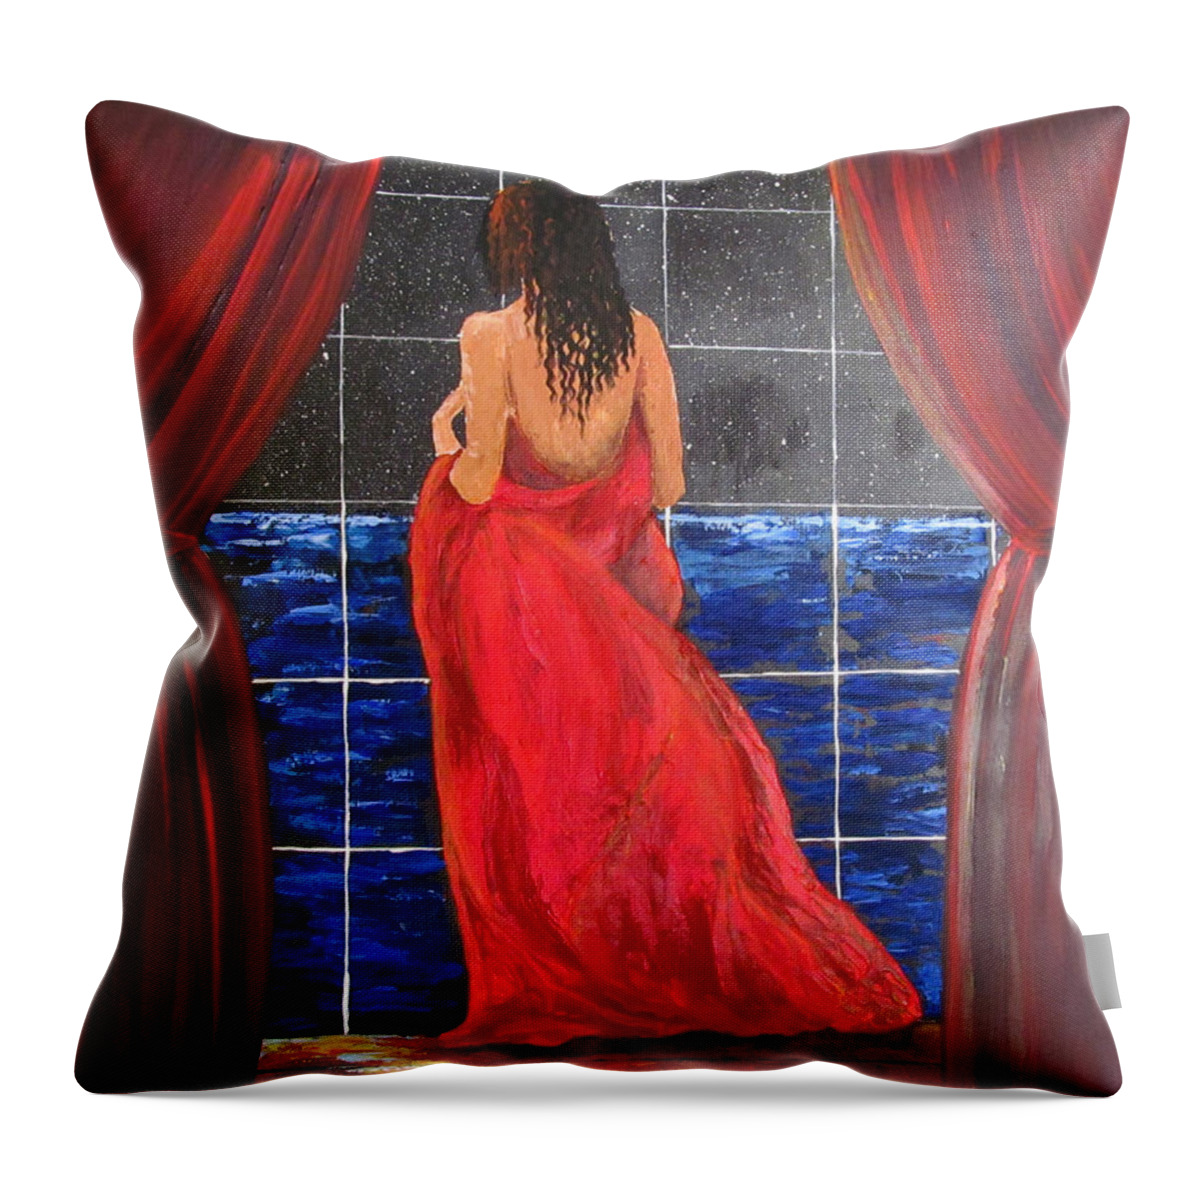 Nature Throw Pillow featuring the painting Nature's Pleasure by Gloria E Barreto-Rodriguez